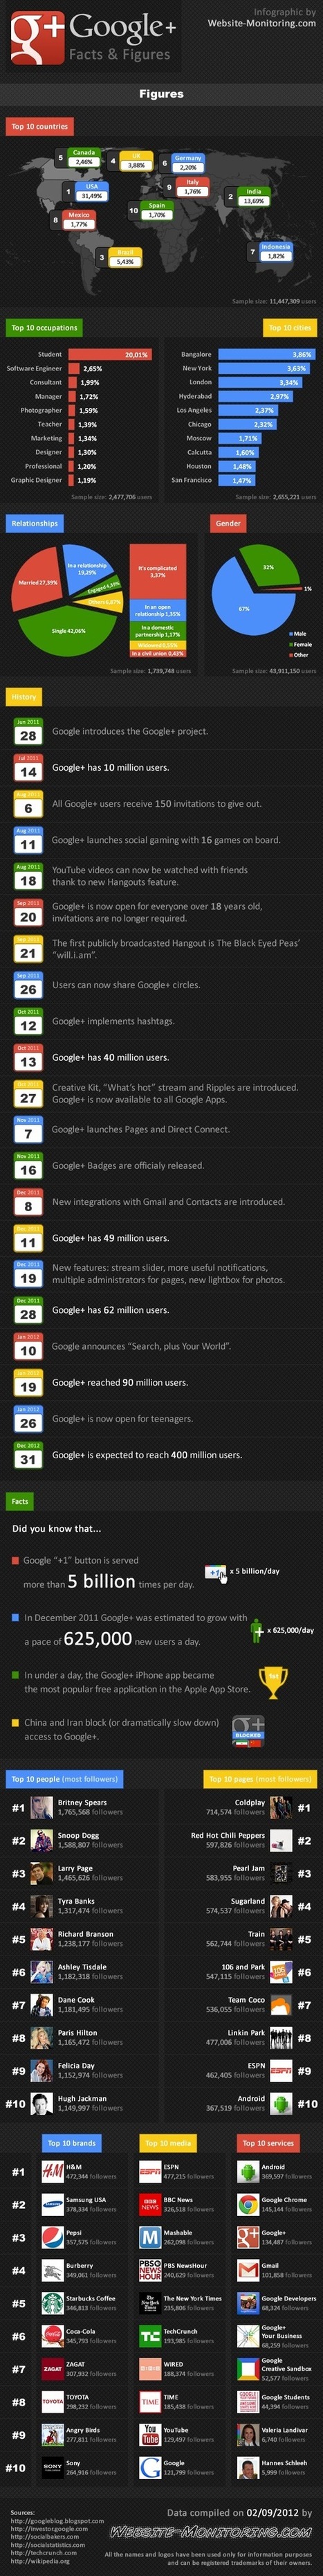 Google+ Facts and Figures [infographic] /@BerriePelser | Latest Social Media News | Scoop.it